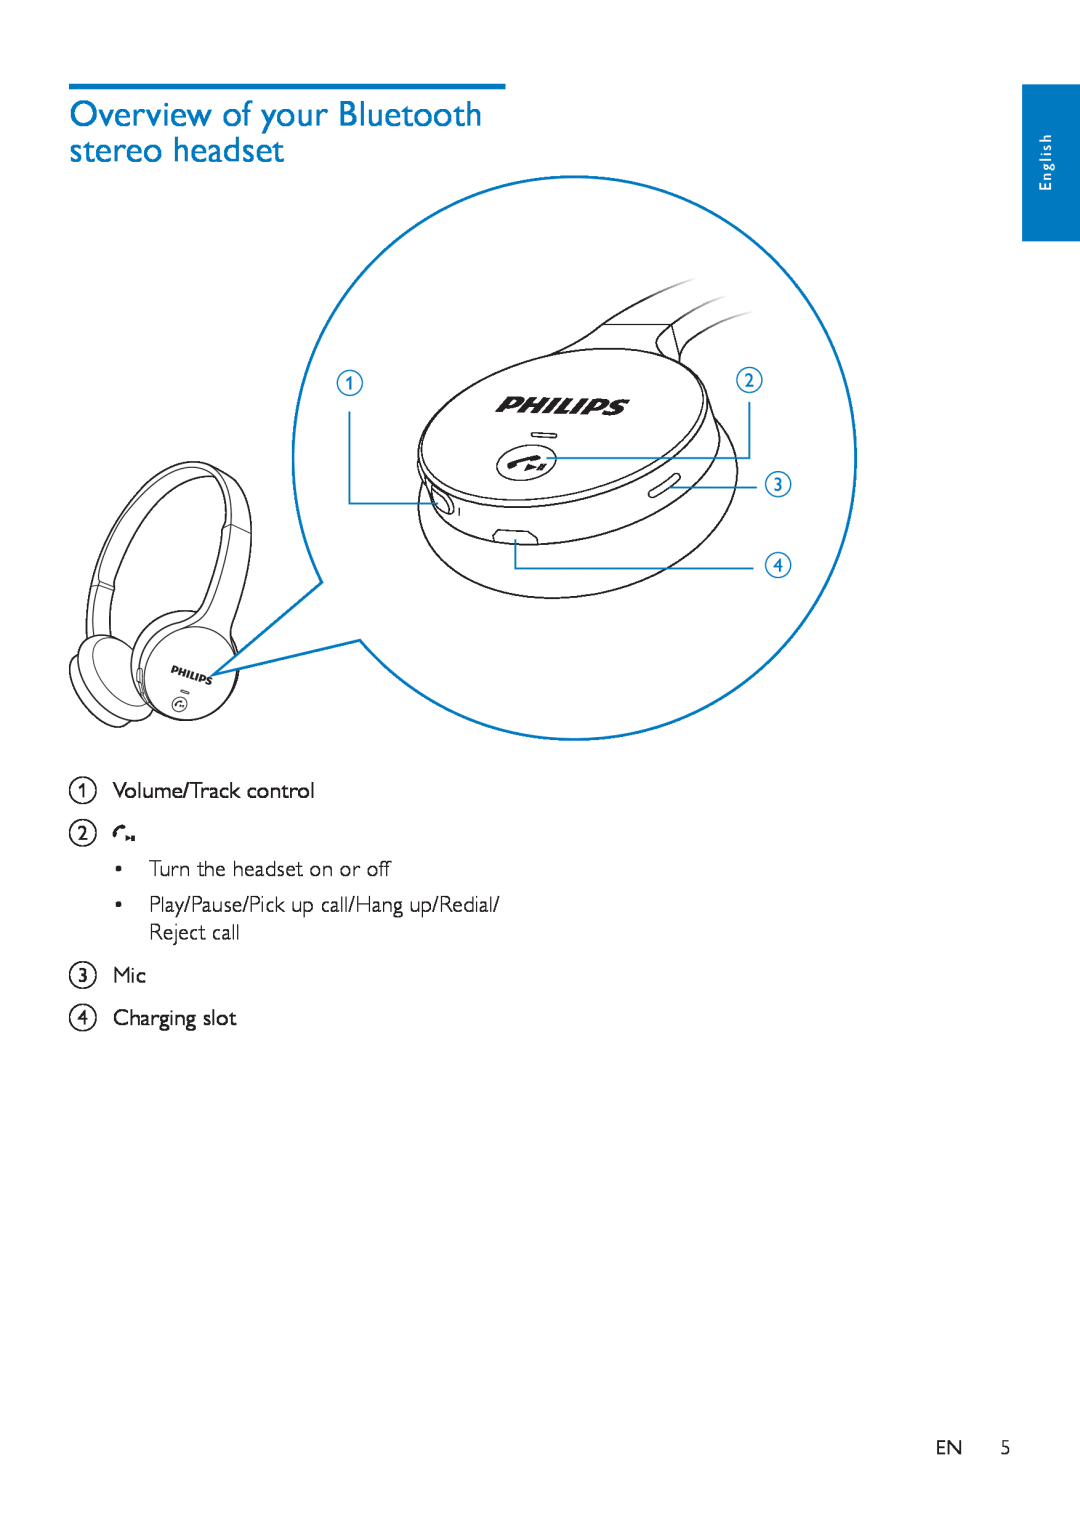 Philips SHB4000 user manual Overview of your Bluetooth stereo headset, AVolume/Track control, Turn the headset on or off 